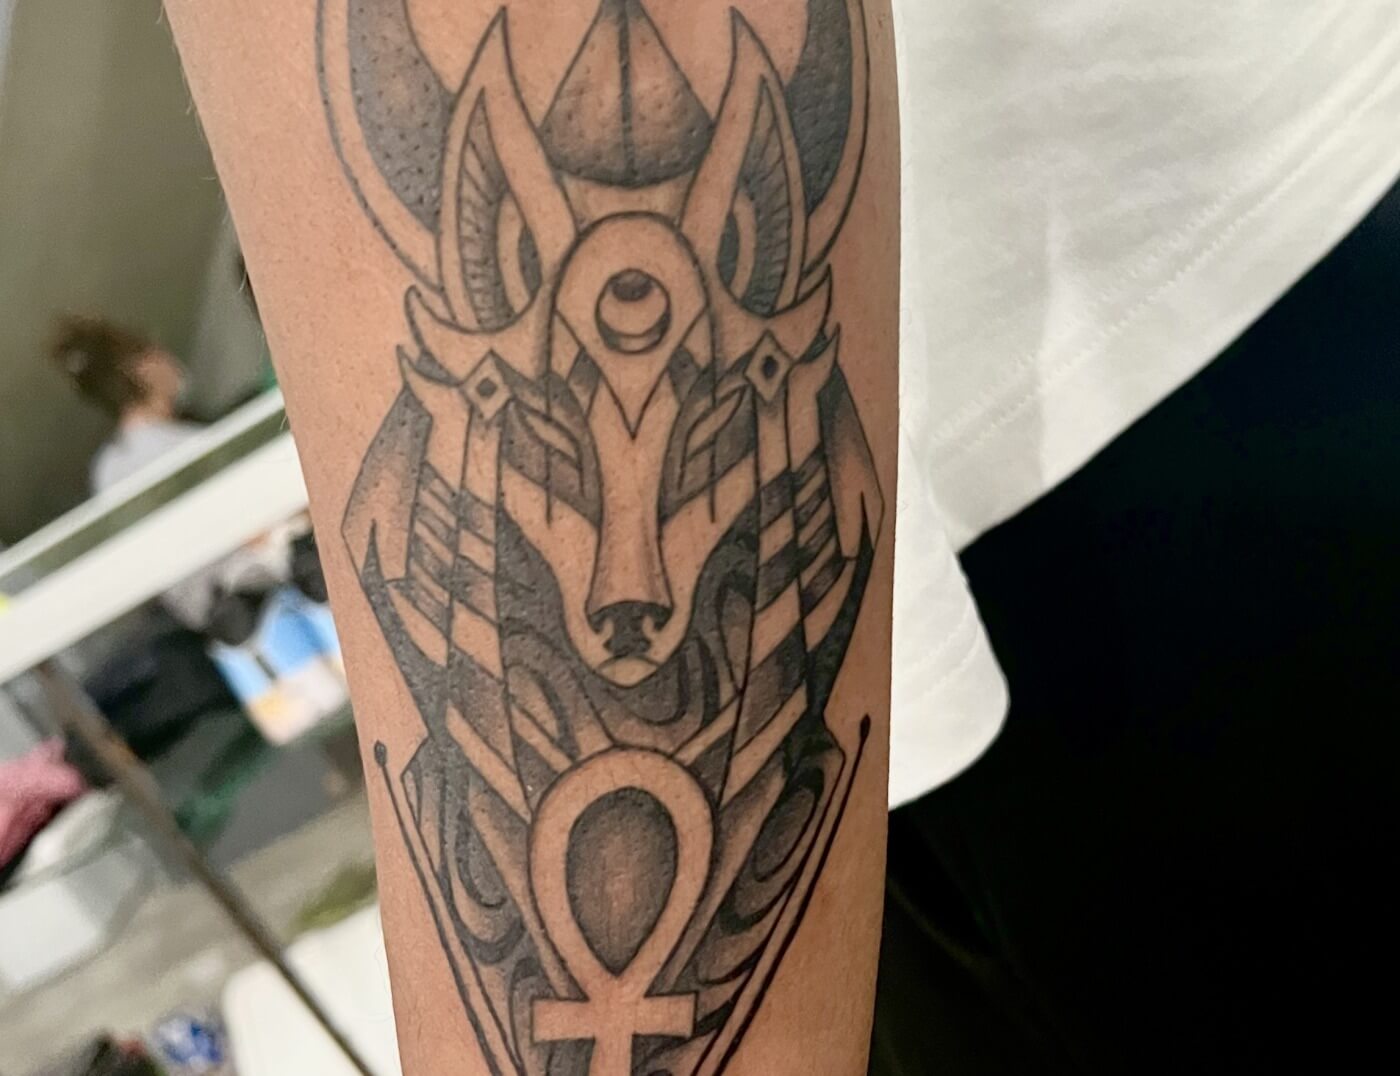 Anubis Tattoo By Funk Tha World At Iron Palm Tattoos In Atlanta, GA. Anubis, the Egyptian God, is a symbol of protection, guidance, or transformation. For some he is also a symbol of judgement. Call 404-973-7828 or stop by for a free consultation with Funk. Walk-ins are always welcome.